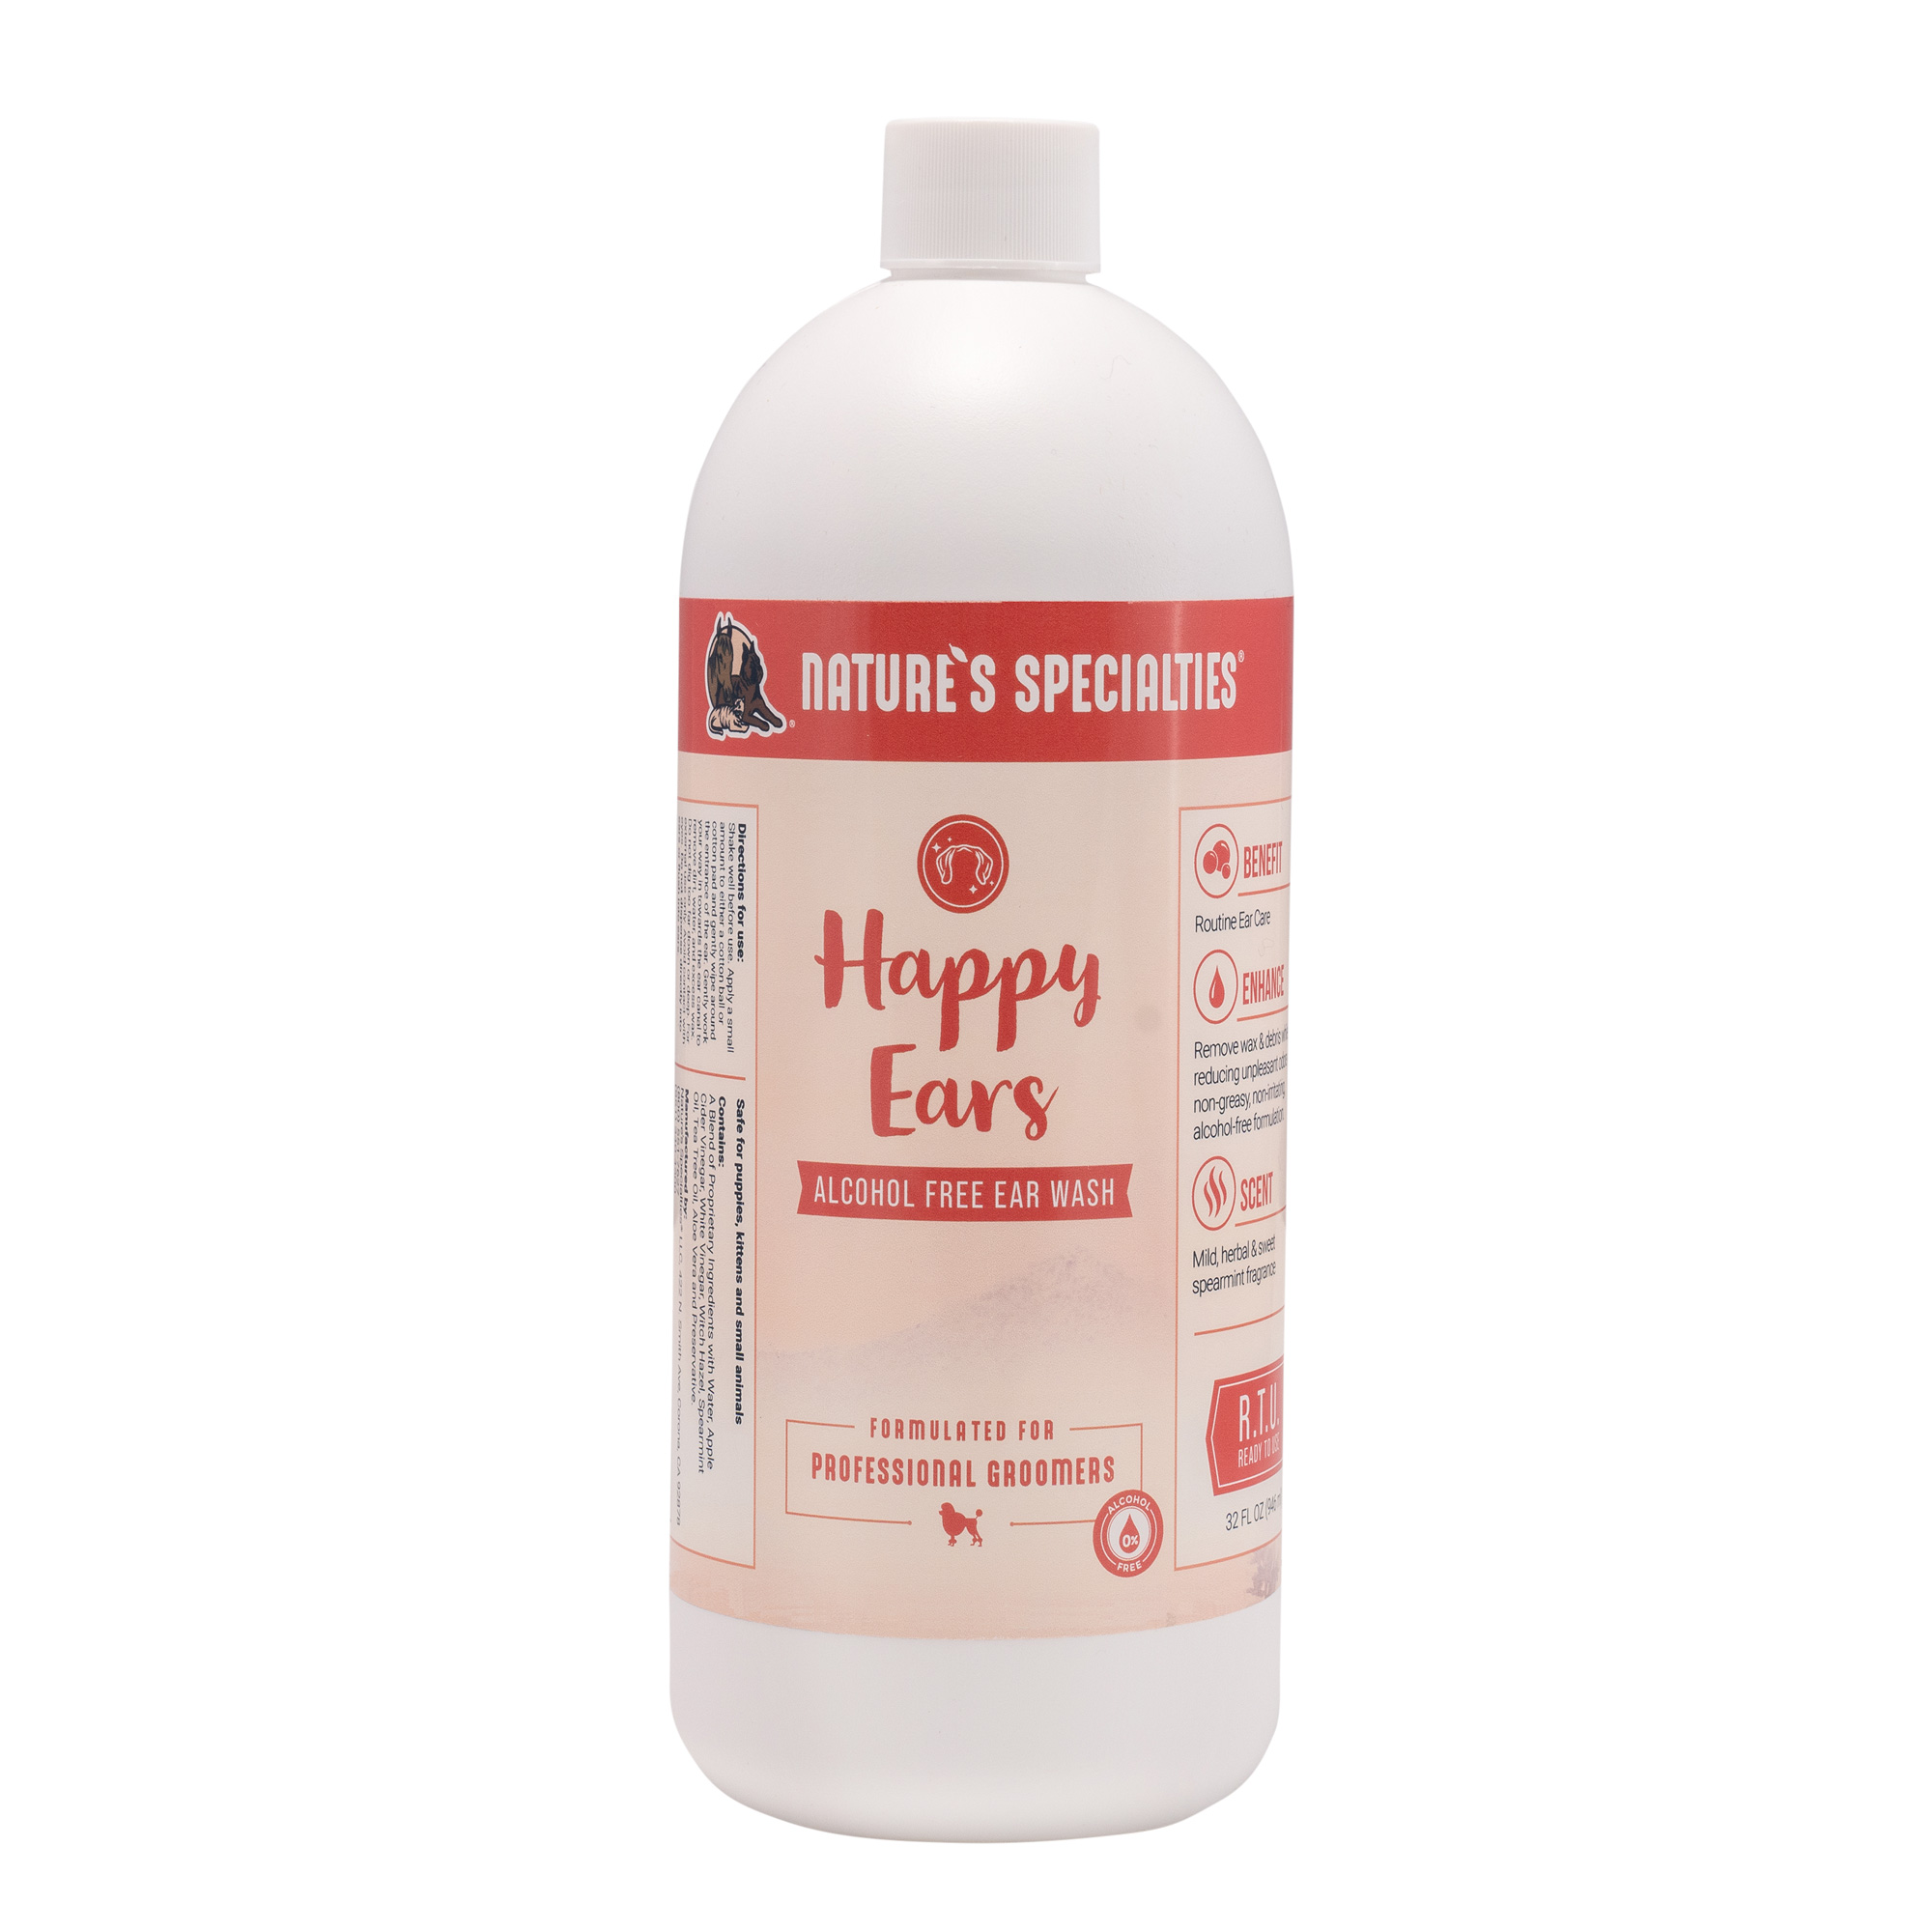 natures specialities happy ears alcohol free ear wash 32 oz